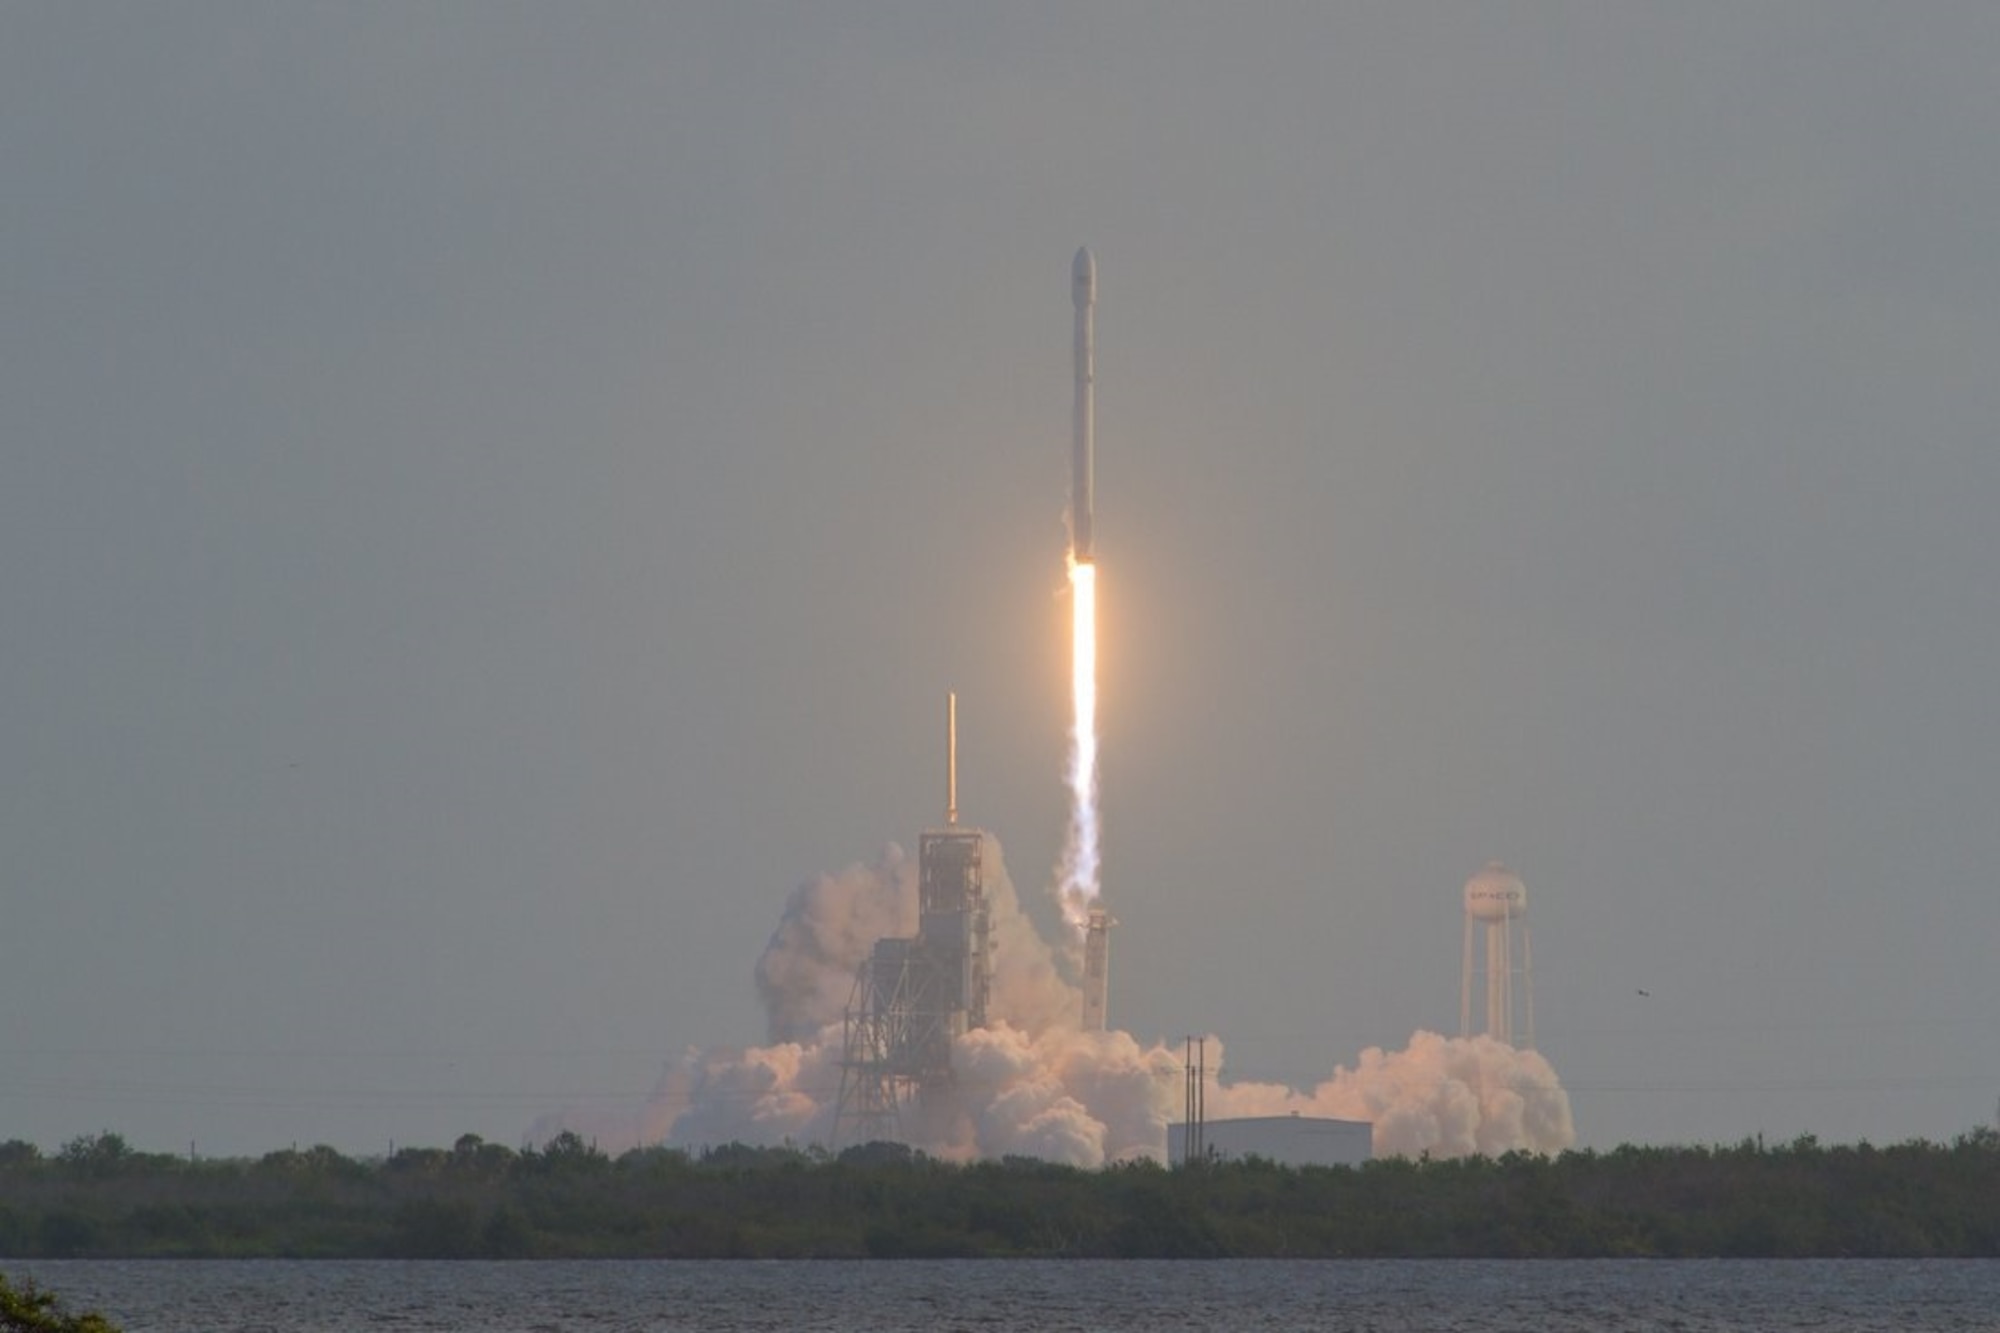 The 45th Space Wing supported SpaceX's successful launch of the NROL-76 spacecraft aboard a Falcon 9 rocket from Space Launch Complex 39A at NASA's Kennedy Space Center May 1 at 7:15 a.m. ET. This launch was SpaceX's first for the National Reconnaissance Office. (Photo by Michael Seeley)